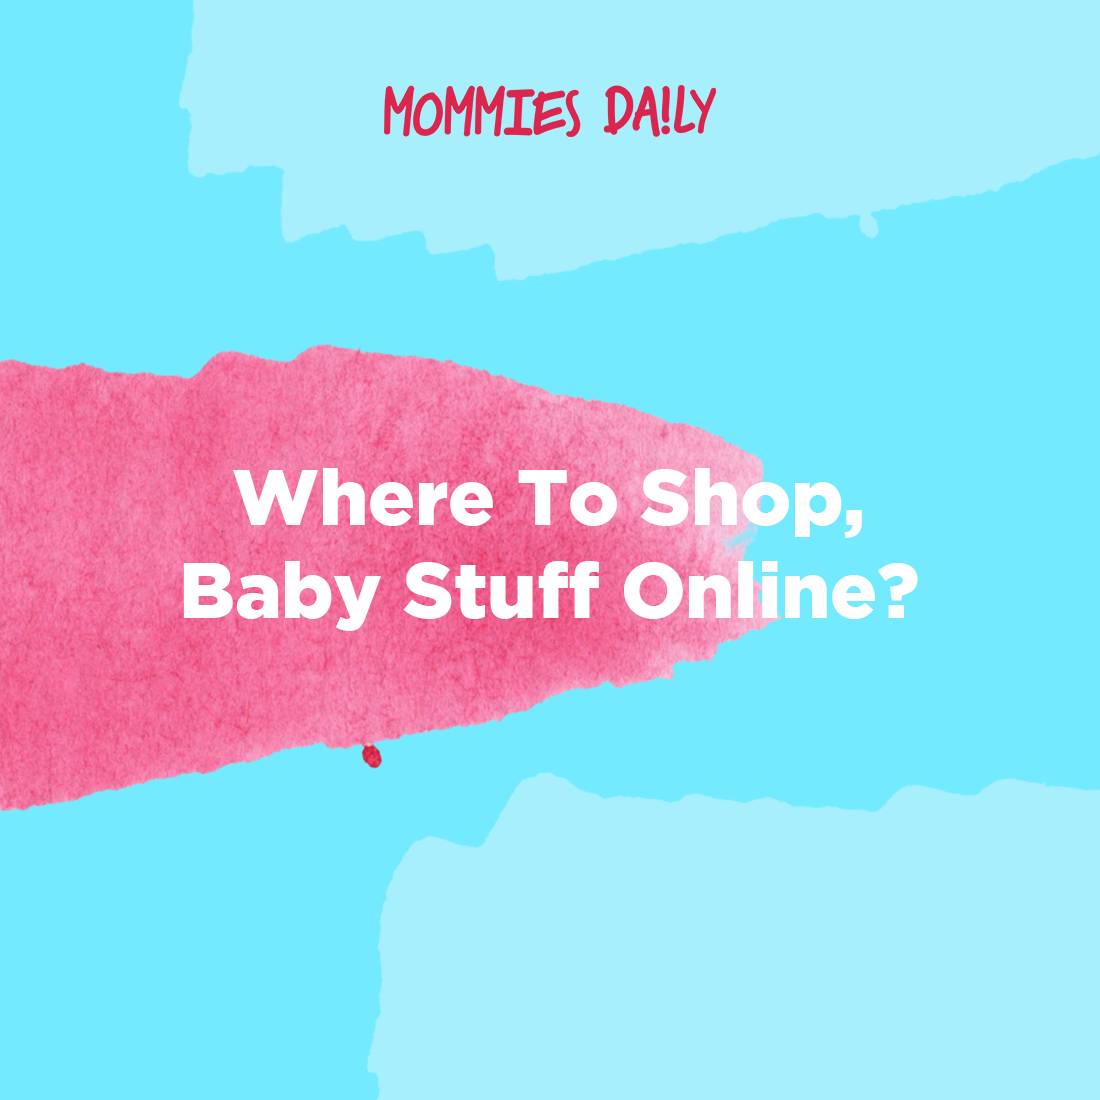 Where To Shop, Baby Stuff Online?